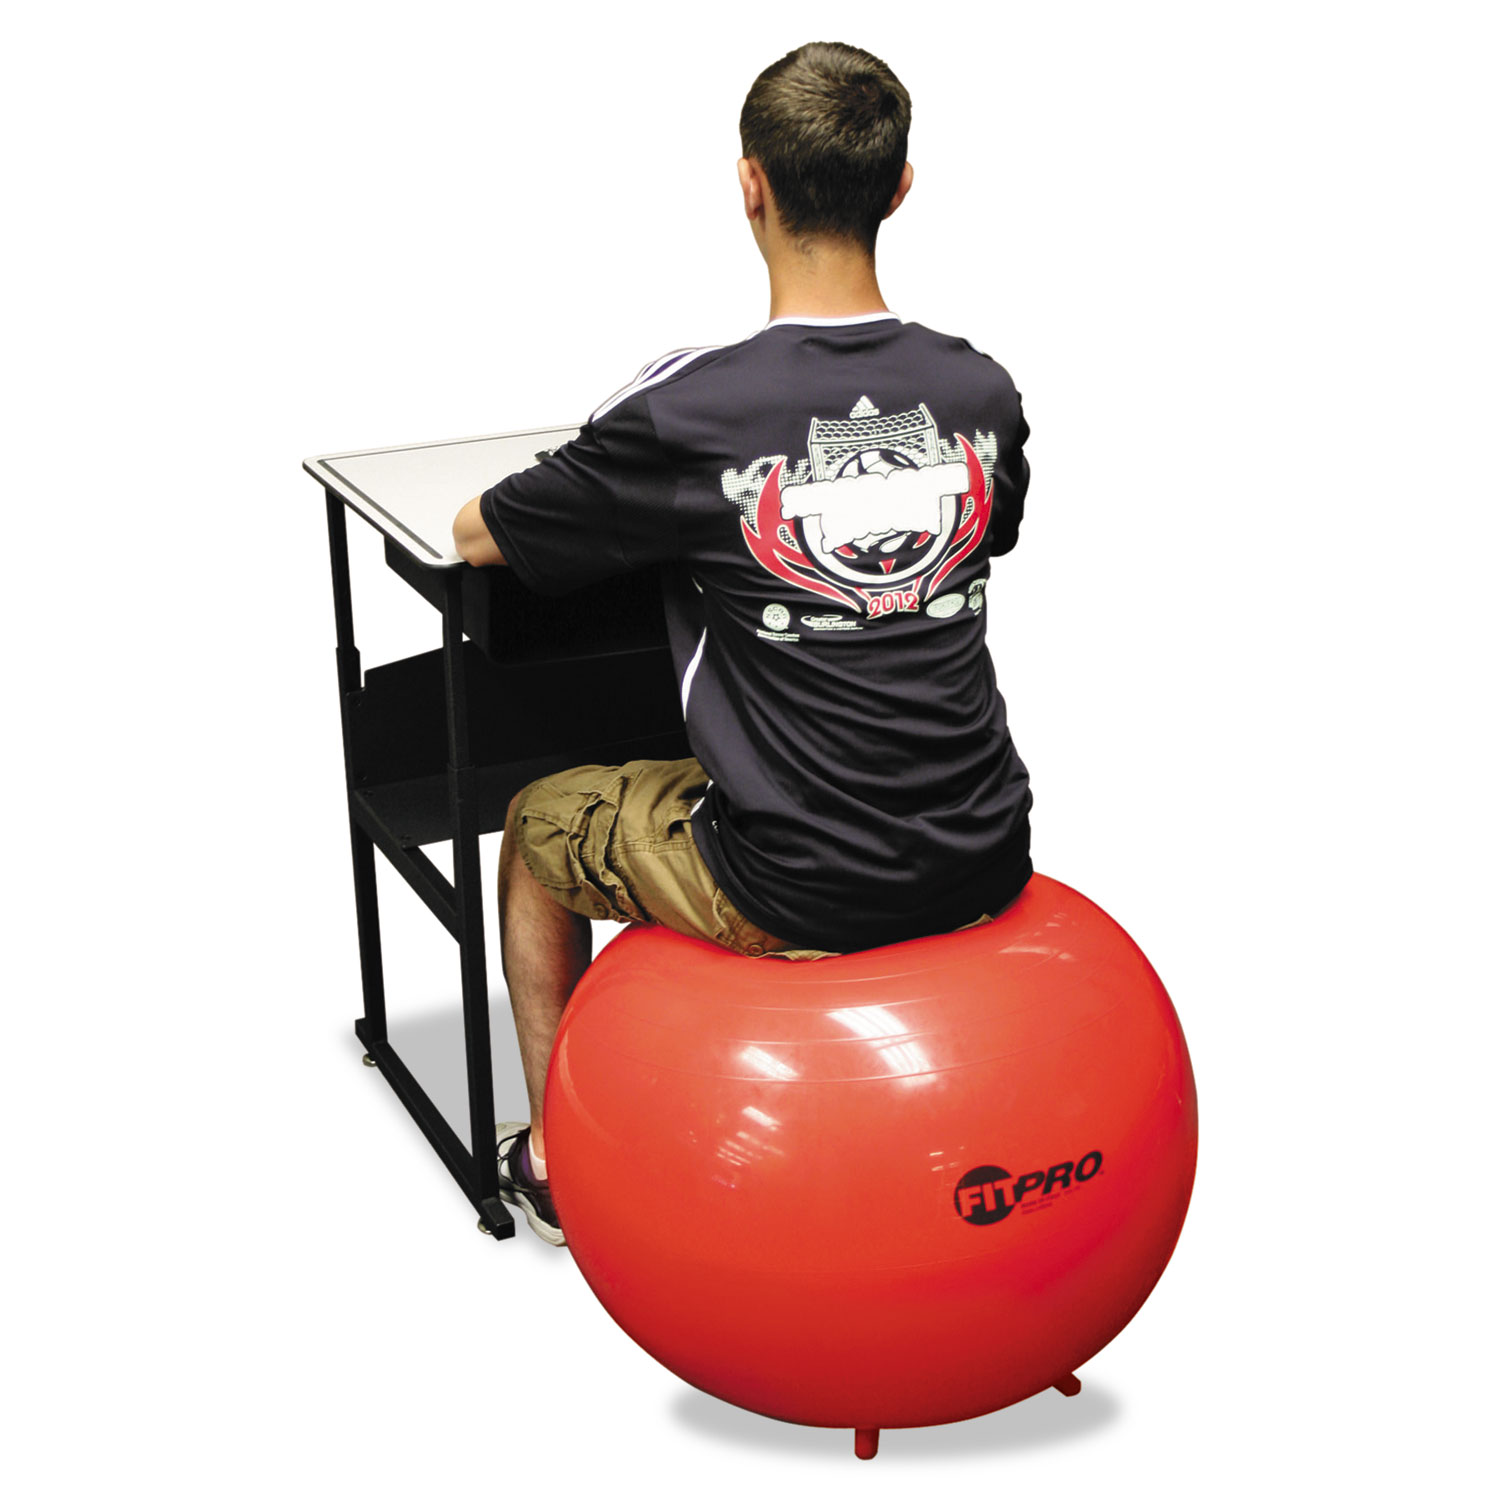 FitPro Ball with Stability Legs, 75cm Diameter, Red